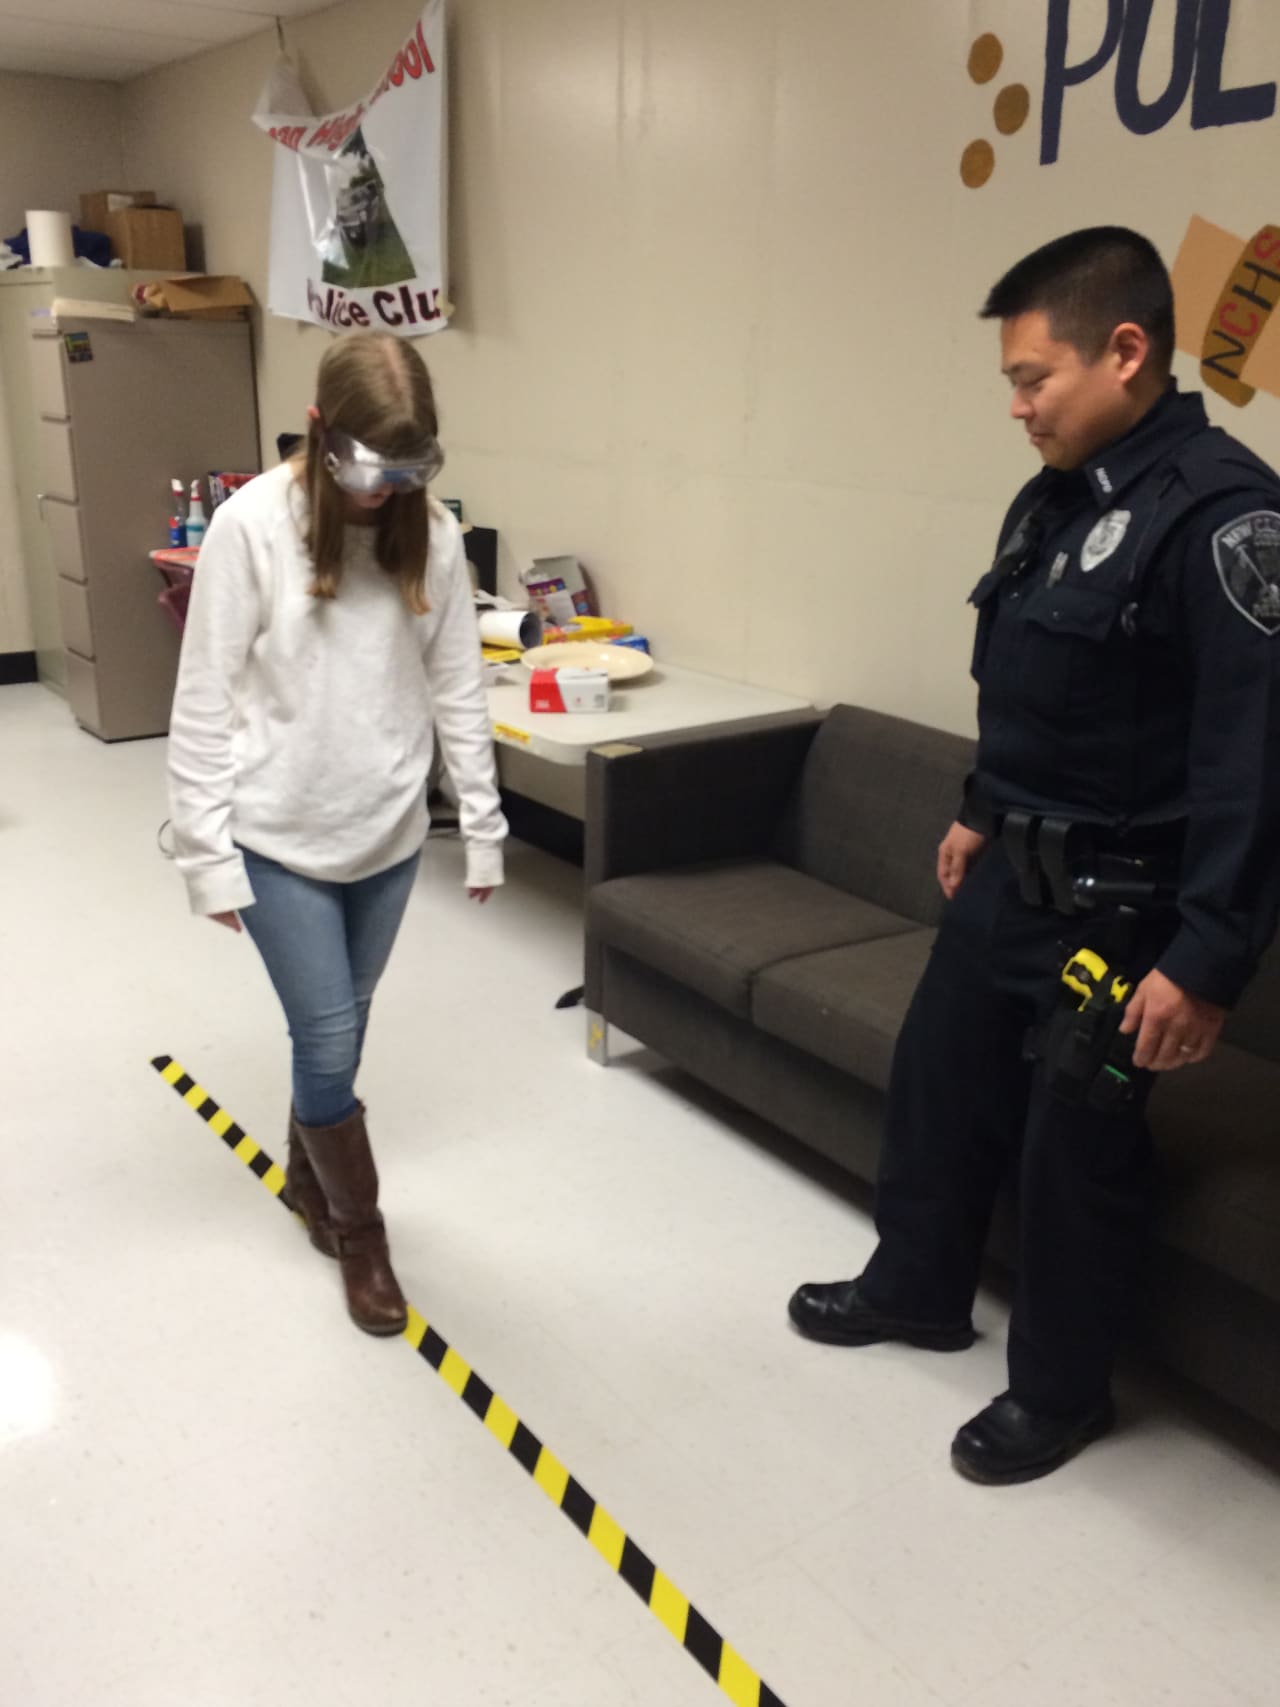 Eliza Haney navigates a straight line while wearing Fatal Vision Goggles that simulate the impact of alcohol on coordination.